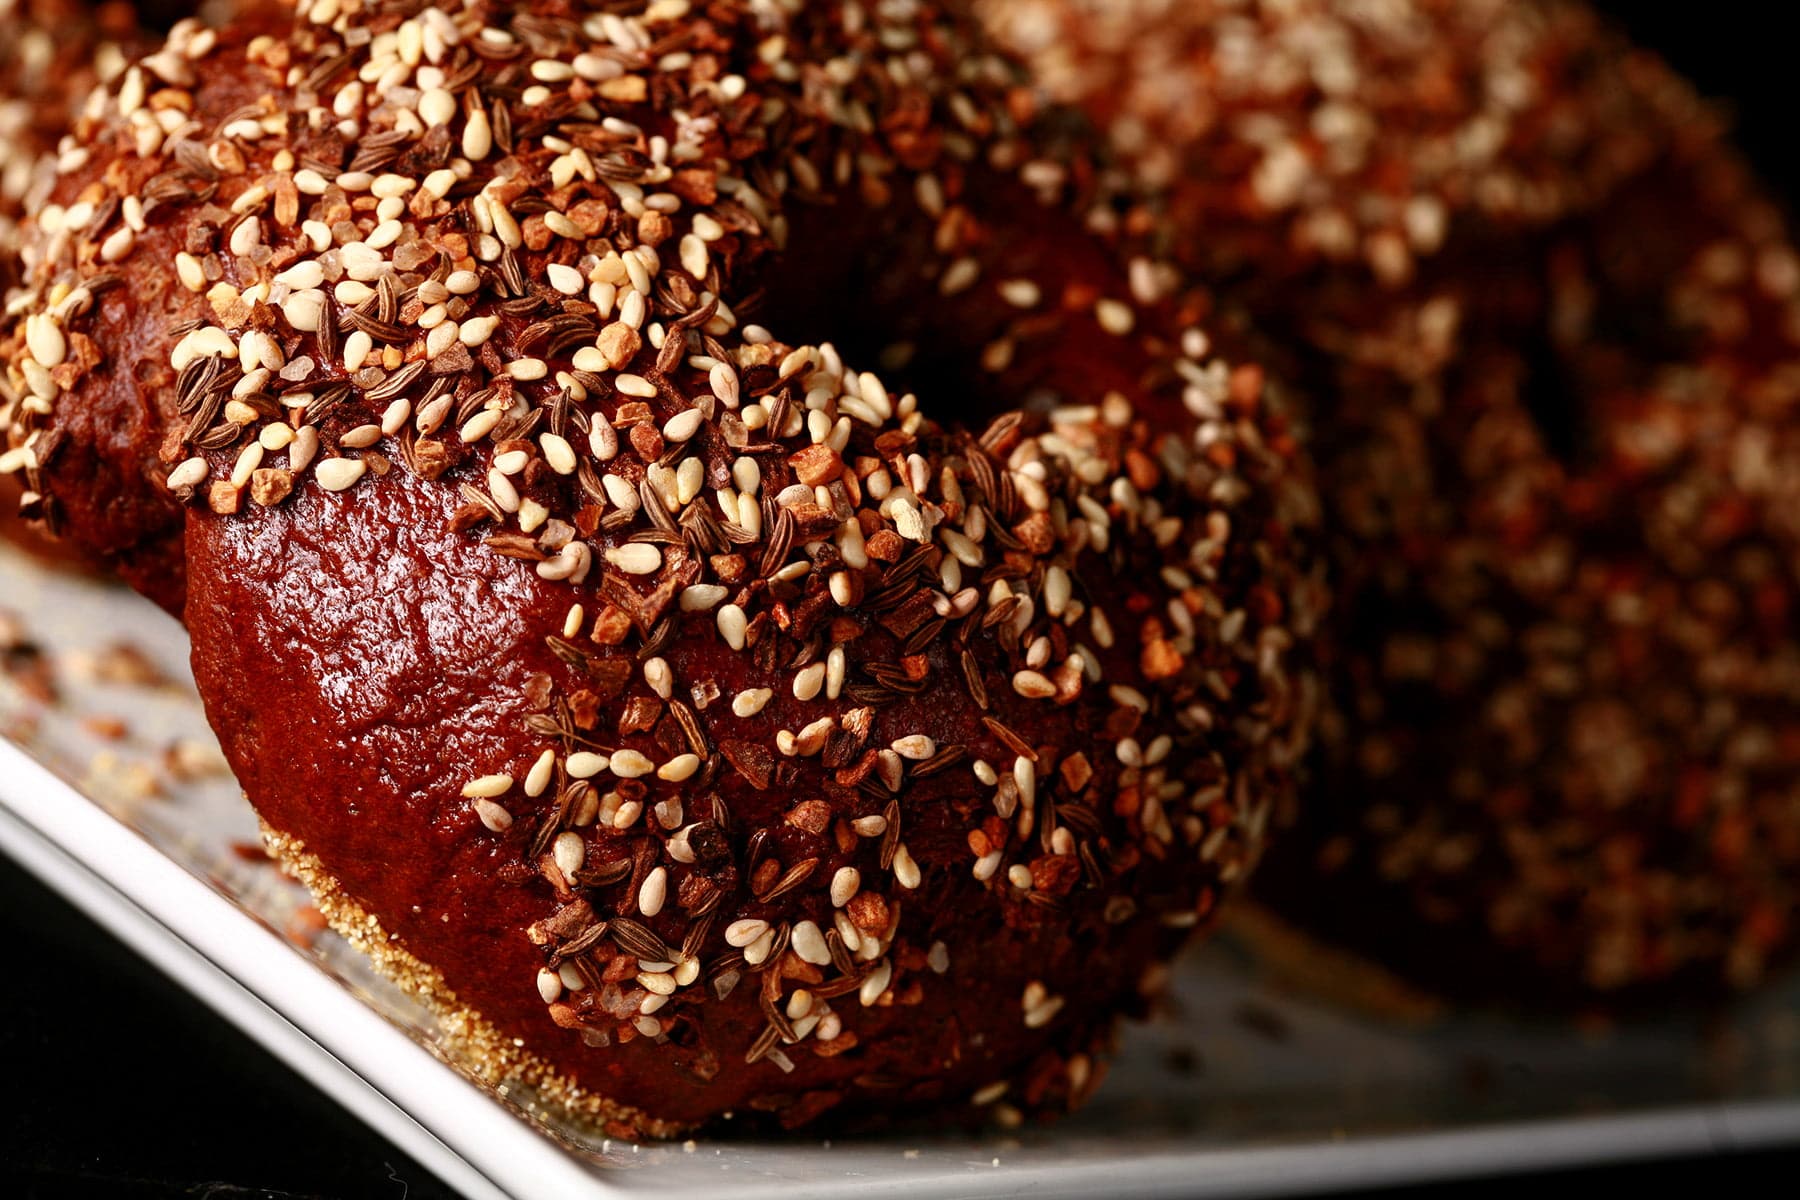 A very close up view of an "everything" style Pumpernickel Bagel.